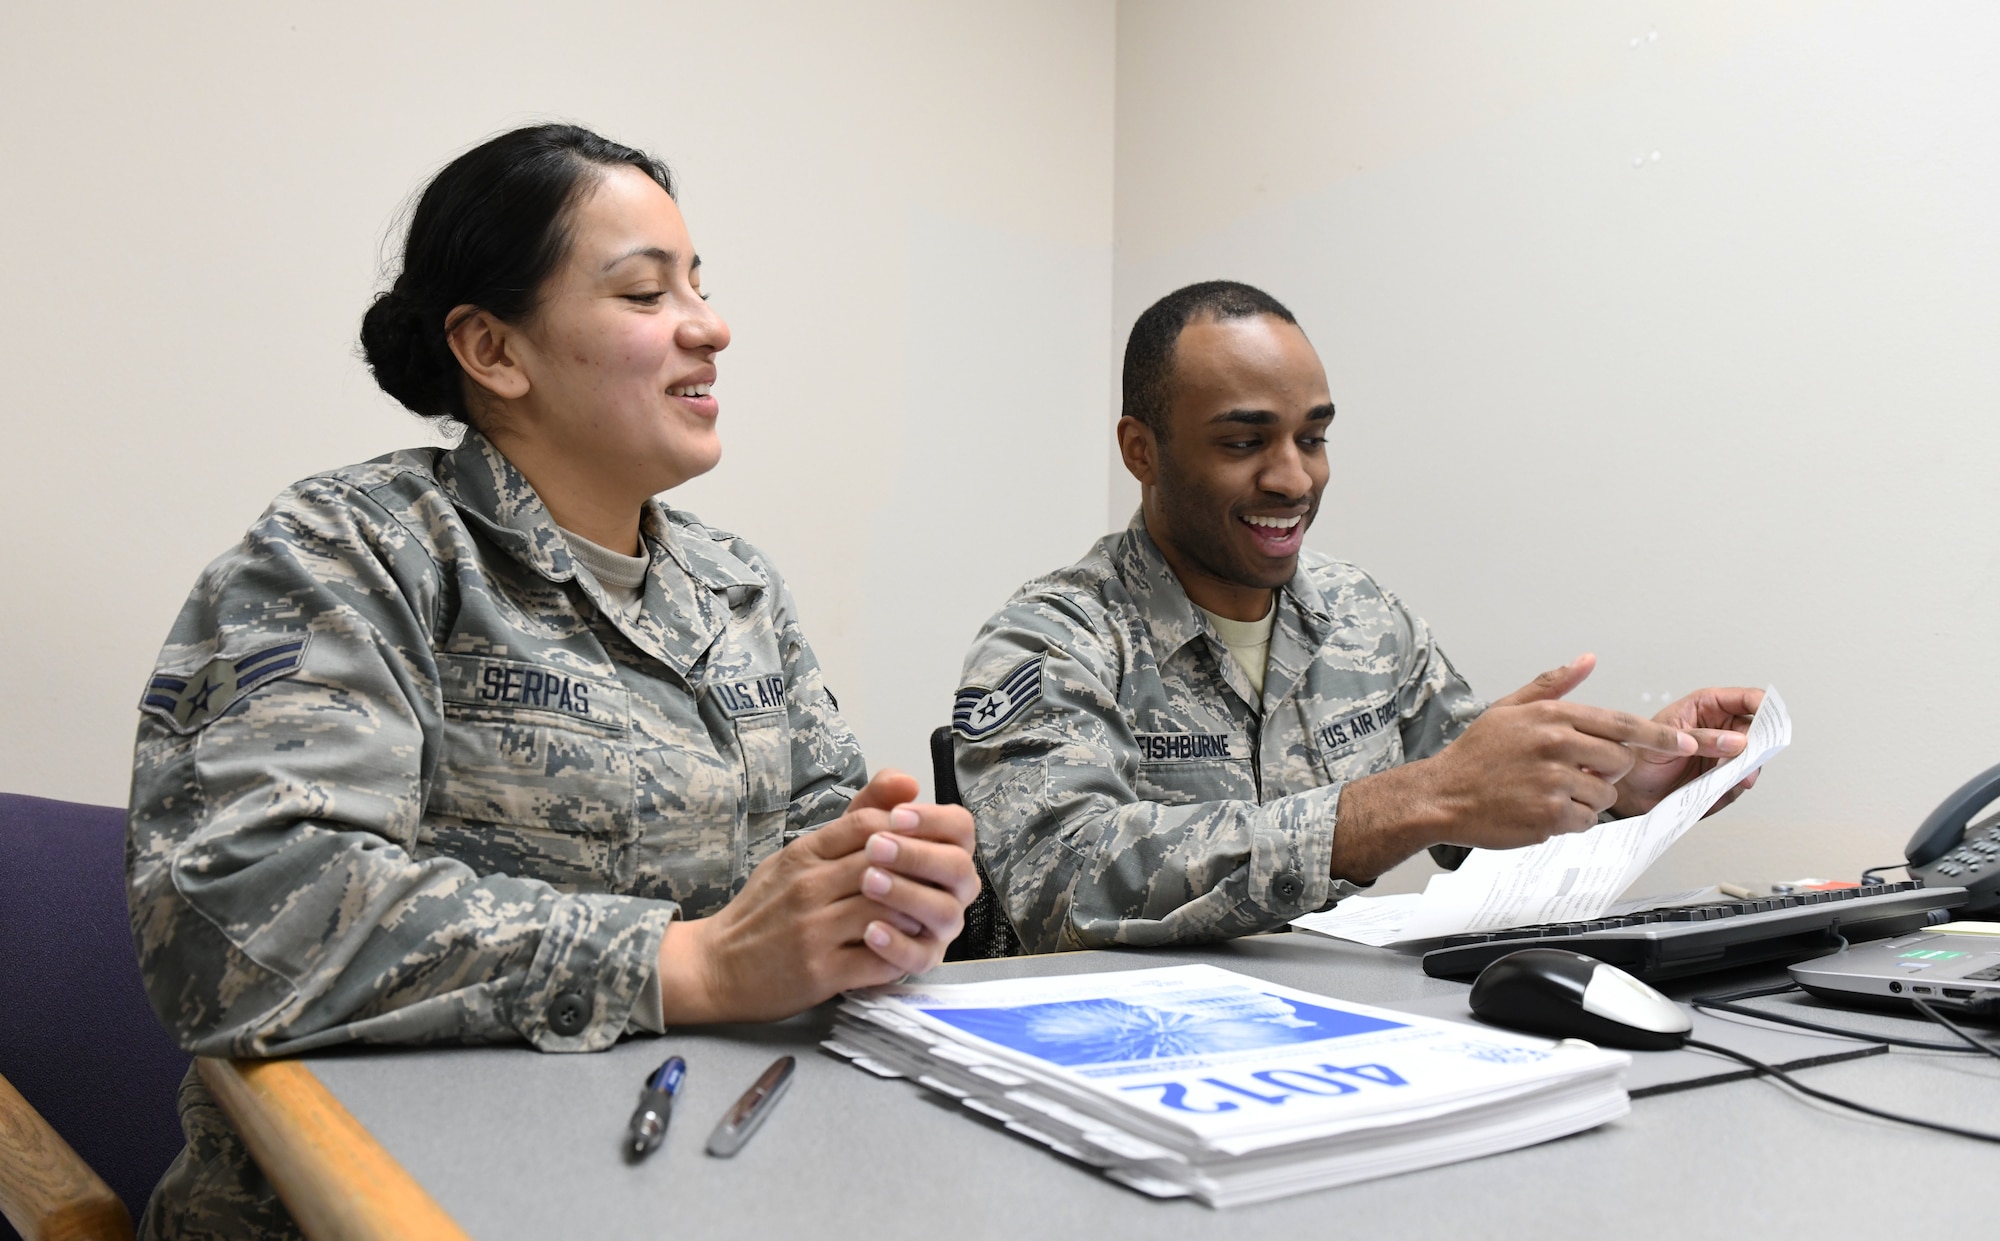 Volunteers at the tax center fill out their tax forms at Ellsworth Air Force Base, S.D., Feb. 1, 2019. The tax center is open to help base members, retirees and military families prepare and file their 2018 tax forms free of charge. U.S. Air Force photo by Airmen 1st Class Thomas Karol)